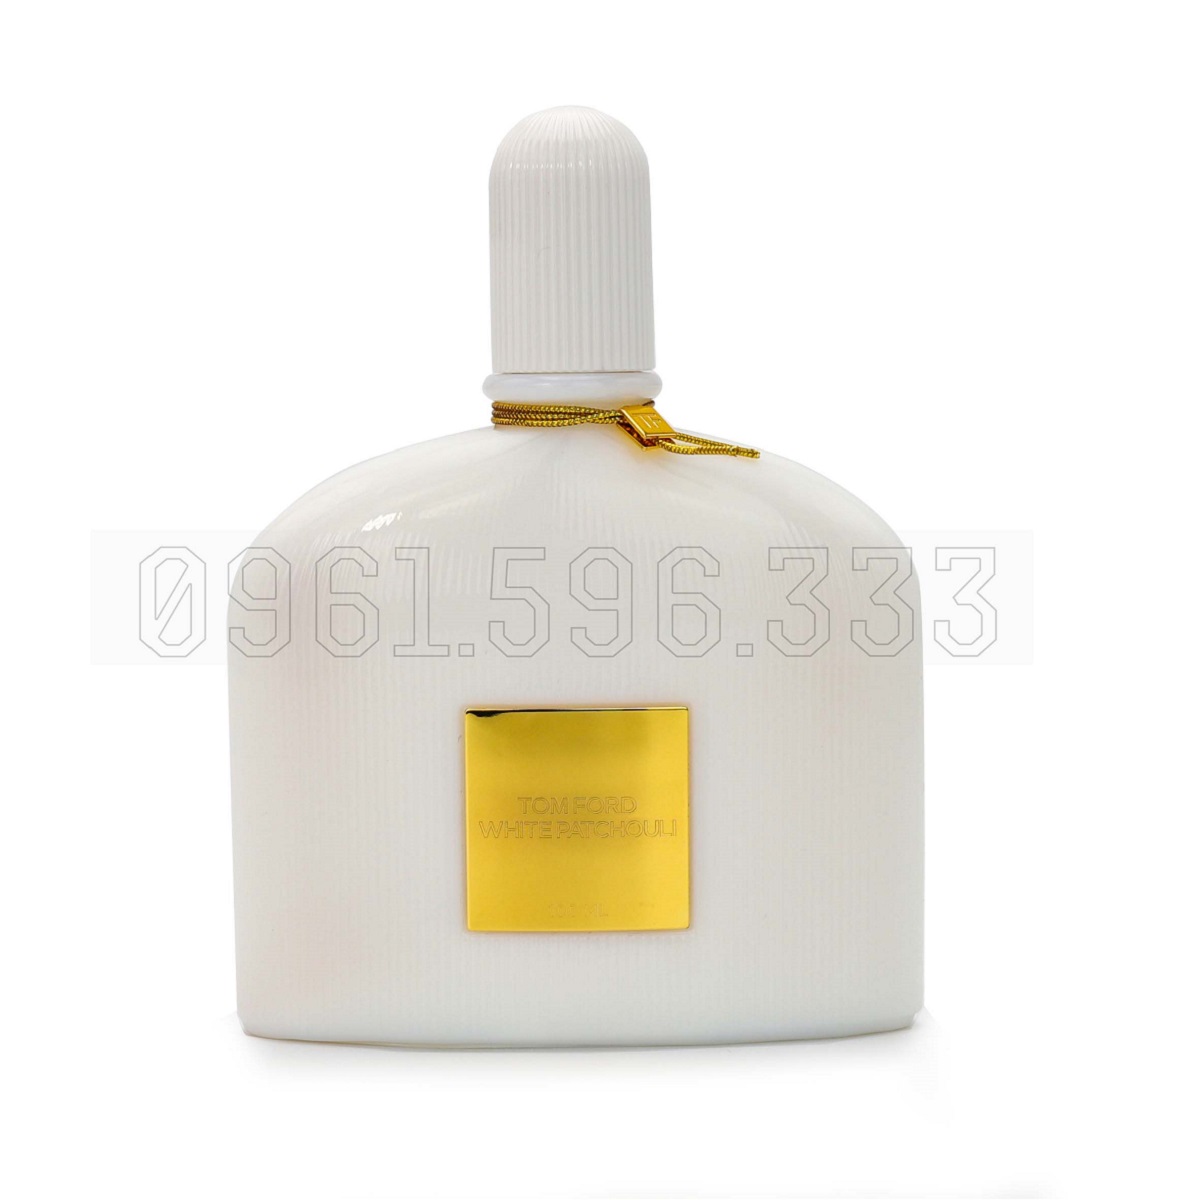 Tom-Ford-White-Patchouli-EDP-chinh-hang